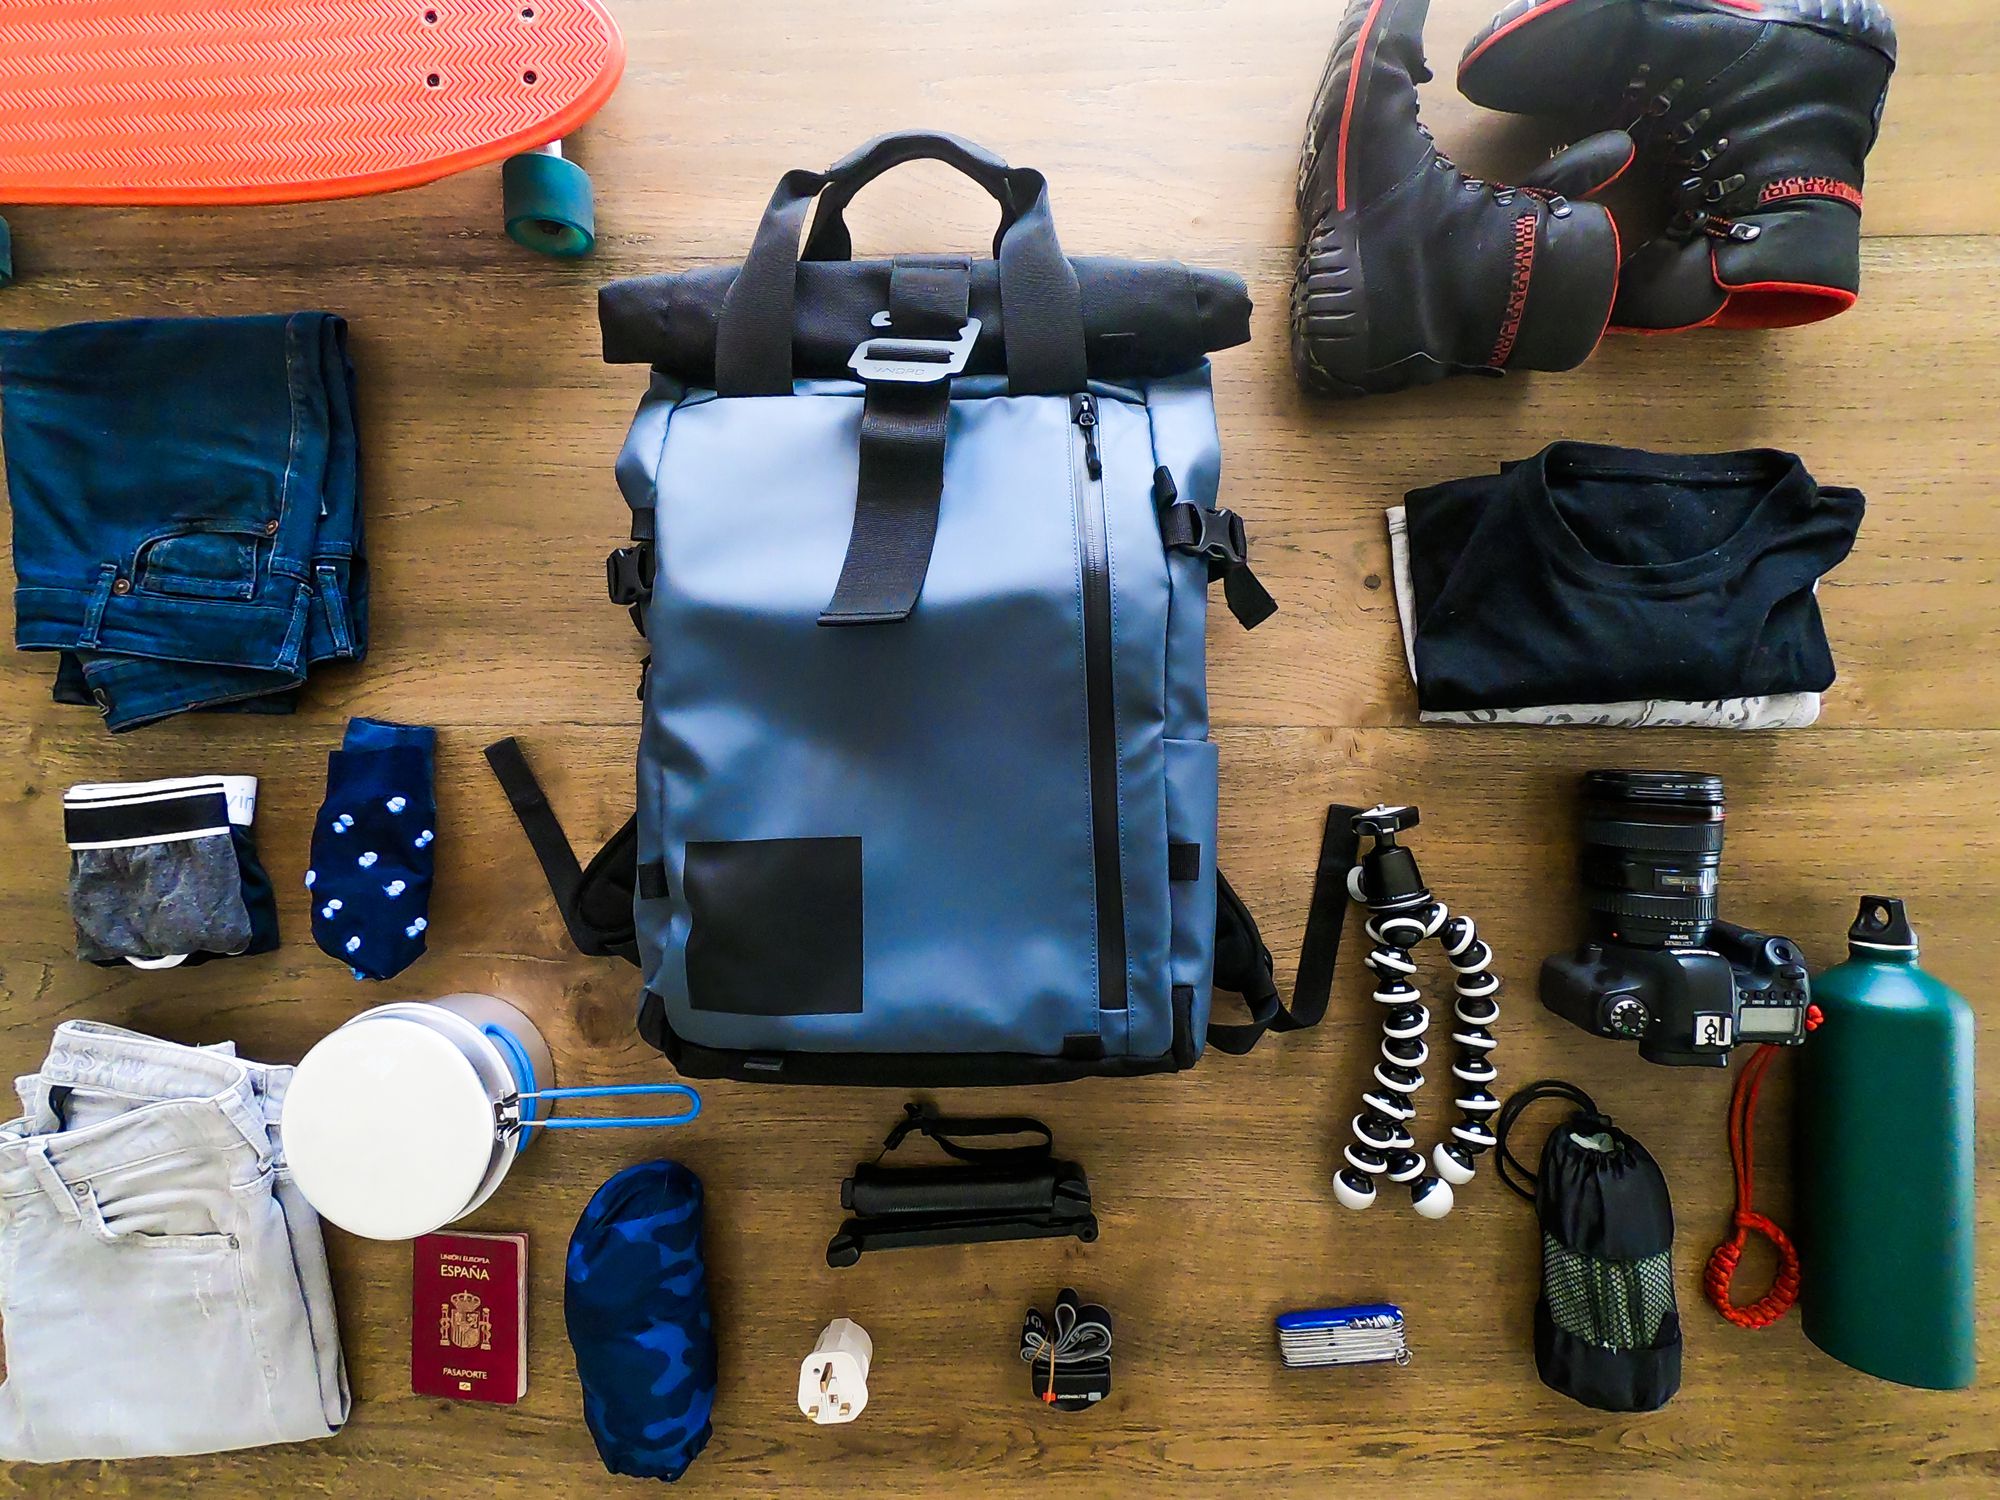 Top Ten Travel Accessories for Backpack Travelers